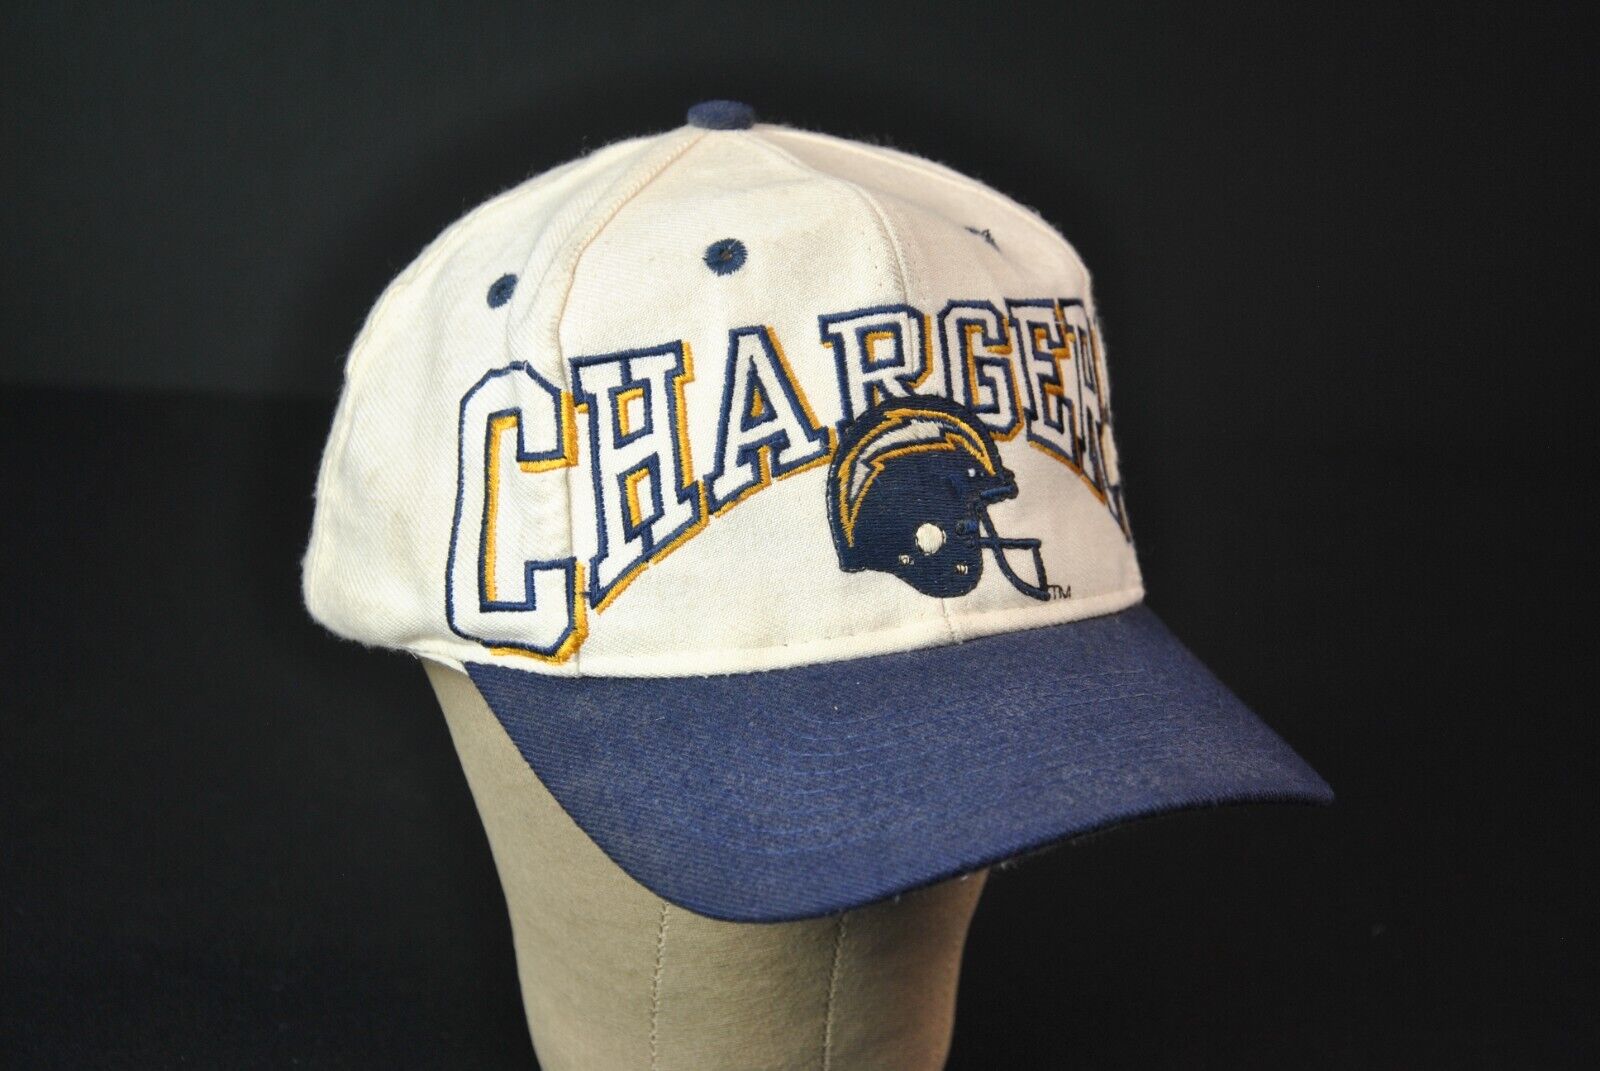 VTG Los Angeles Chargers Hat Cap Team NFL Football San Diego 8324S